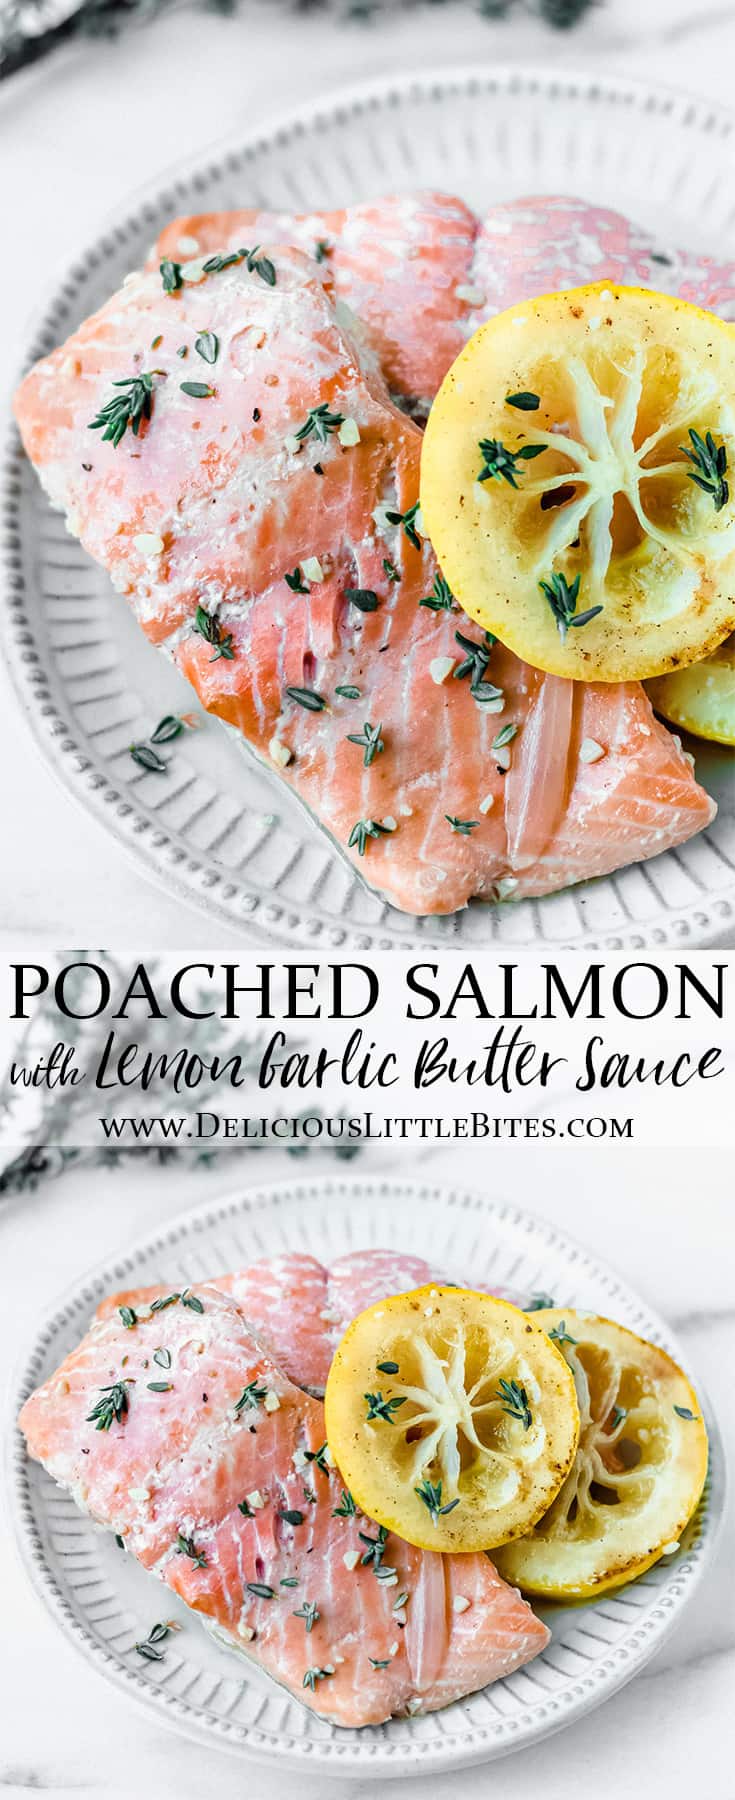 Poached Salmon with Lemon Garlic Butter Sauce - Delicious Little Bites